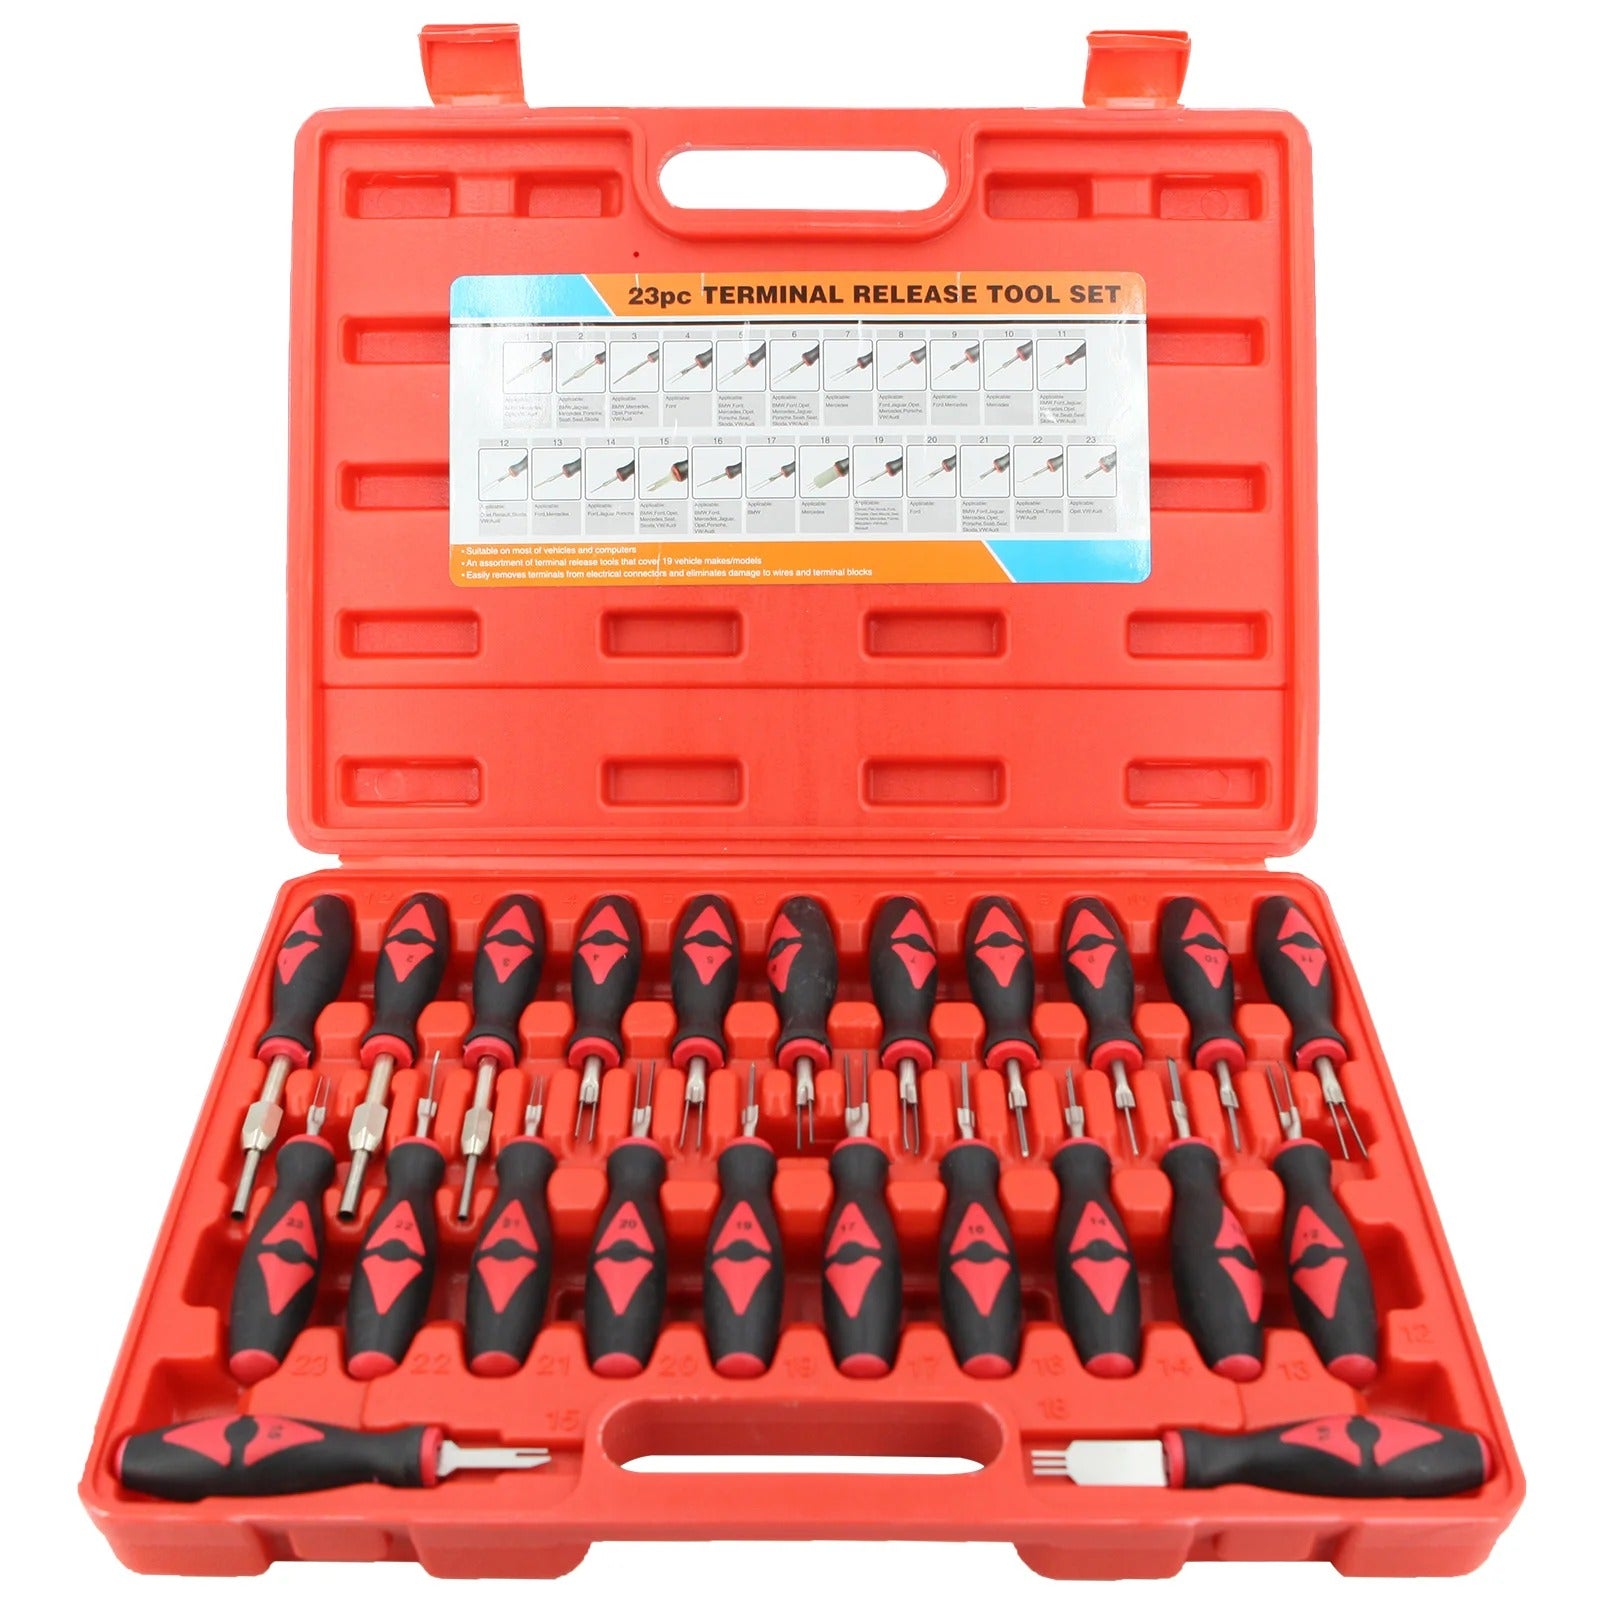 23 Pcs Vehicle Terminal De-pinning Removal Tool Kit for Automotive Electrical Wiring Connector Pin Extraction